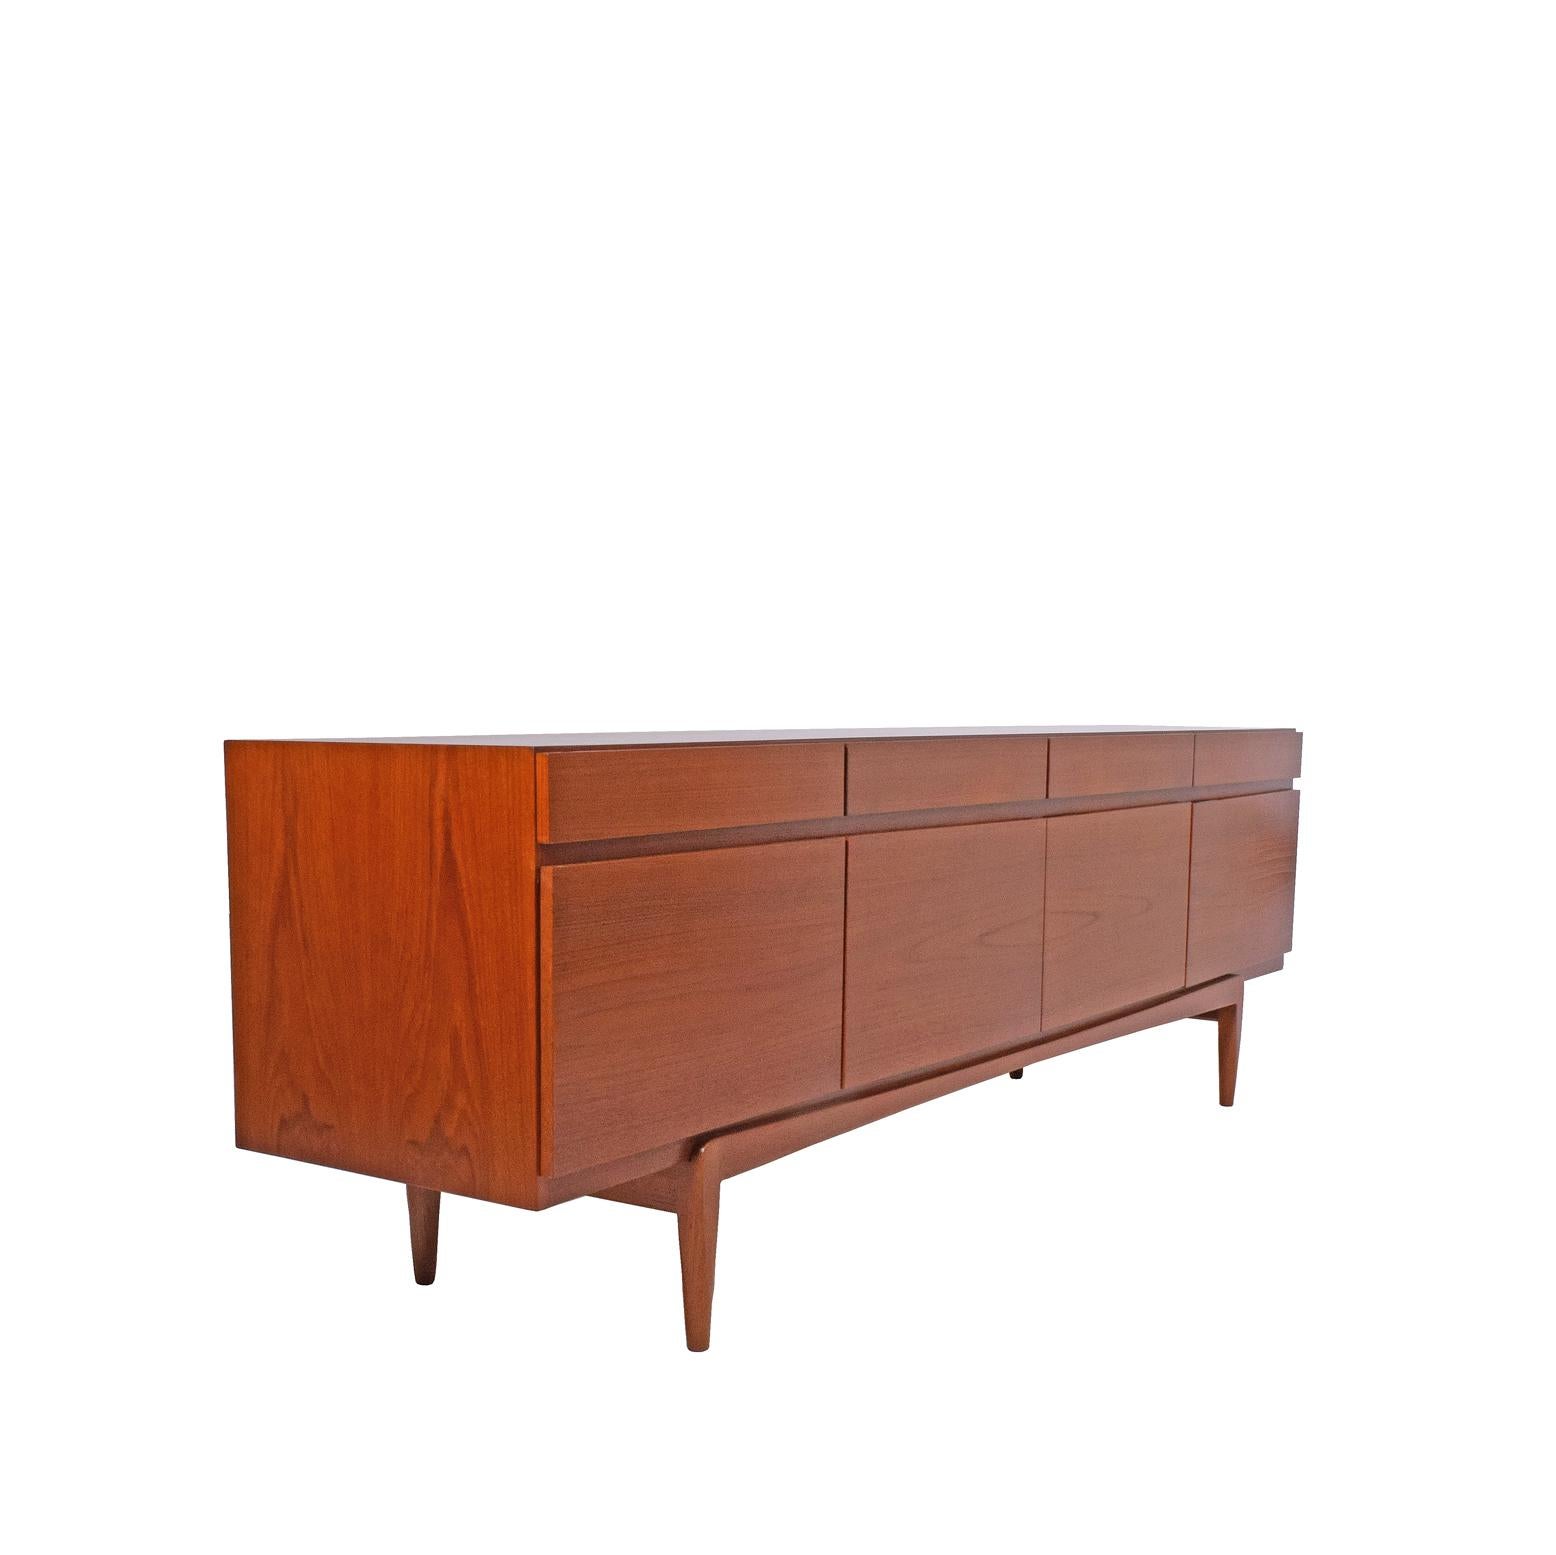 Free standing teak modern credenza four drawers and four doors one with expose finger join shallow pull out / pull-out drawers three other compartments with adjustable shelves. Danish quality label.